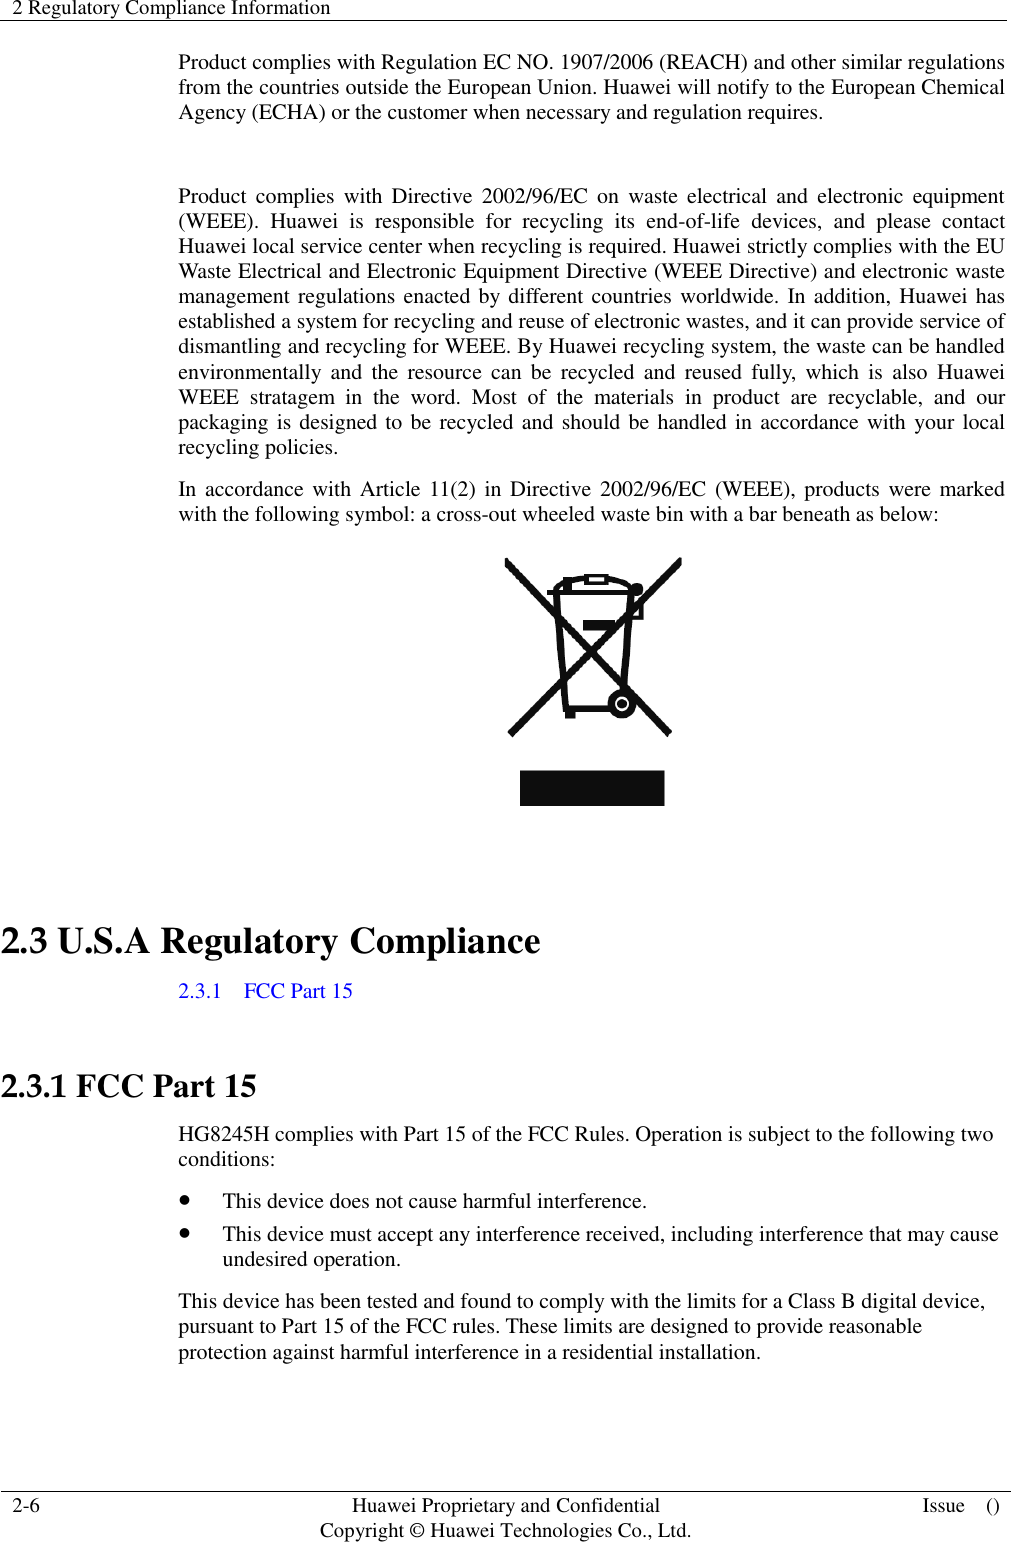 2 Regulatory Compliance Information    2-6 Huawei Proprietary and Confidential                                     Copyright © Huawei Technologies Co., Ltd. Issue    ()  Product complies with Regulation EC NO. 1907/2006 (REACH) and other similar regulations from the countries outside the European Union. Huawei will notify to the European Chemical Agency (ECHA) or the customer when necessary and regulation requires.  Product  complies  with  Directive  2002/96/EC  on  waste electrical and  electronic  equipment (WEEE).  Huawei  is  responsible  for  recycling  its  end-of-life  devices,  and  please  contact Huawei local service center when recycling is required. Huawei strictly complies with the EU Waste Electrical and Electronic Equipment Directive (WEEE Directive) and electronic waste management regulations enacted by different countries worldwide. In addition, Huawei has established a system for recycling and reuse of electronic wastes, and it can provide service of dismantling and recycling for WEEE. By Huawei recycling system, the waste can be handled environmentally  and  the  resource  can  be  recycled  and  reused  fully,  which  is  also  Huawei WEEE  stratagem  in  the  word.  Most  of  the  materials  in  product  are  recyclable,  and  our packaging is designed to be recycled and should be handled in accordance with your local recycling policies.   In accordance  with Article 11(2) in Directive 2002/96/EC (WEEE), products were marked with the following symbol: a cross-out wheeled waste bin with a bar beneath as below:   2.3 U.S.A Regulatory Compliance 2.3.1    FCC Part 15  2.3.1 FCC Part 15 HG8245H complies with Part 15 of the FCC Rules. Operation is subject to the following two conditions:  This device does not cause harmful interference.  This device must accept any interference received, including interference that may cause undesired operation. This device has been tested and found to comply with the limits for a Class B digital device, pursuant to Part 15 of the FCC rules. These limits are designed to provide reasonable protection against harmful interference in a residential installation. 